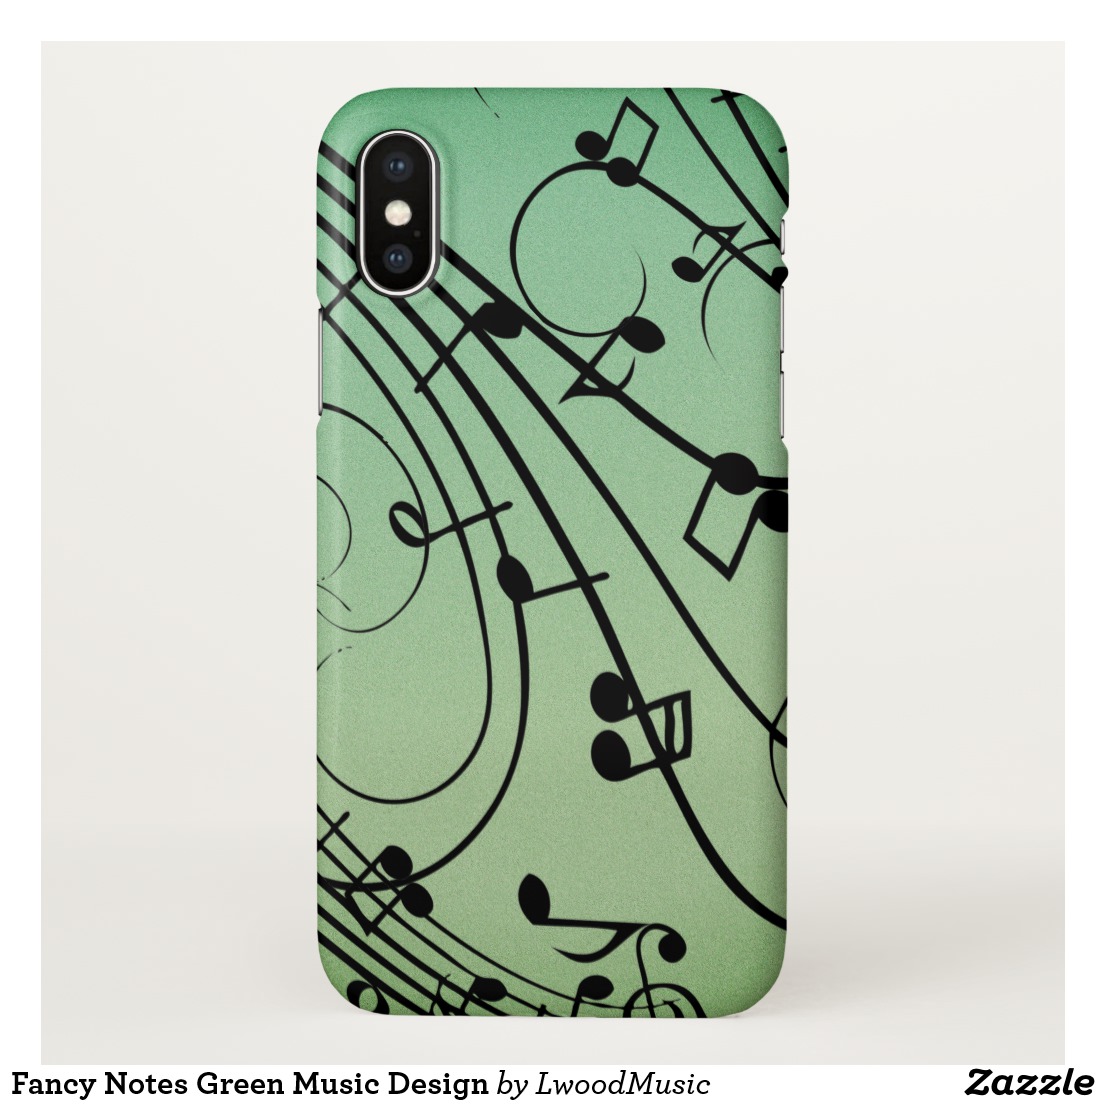 Fancy Notes Green Music Design iPhone X Case